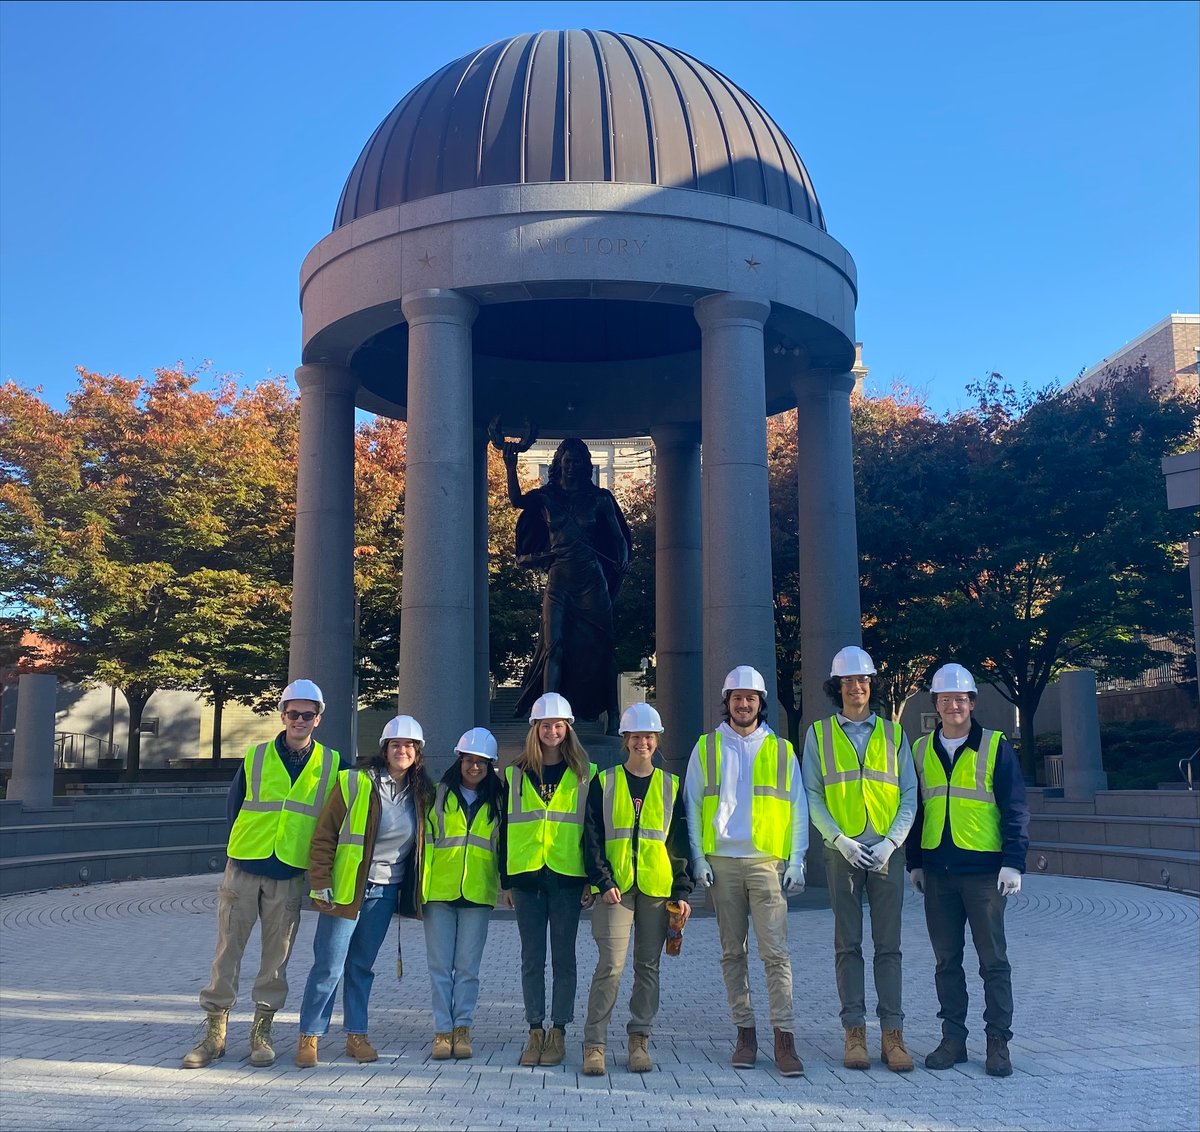 Many thanks to Turner Construction for inviting #TCNJEngineering students to their newest project site at the #NJ Executive State House in Trenton! #TurnerConstruction #TCNJ #engineering #civilengineering